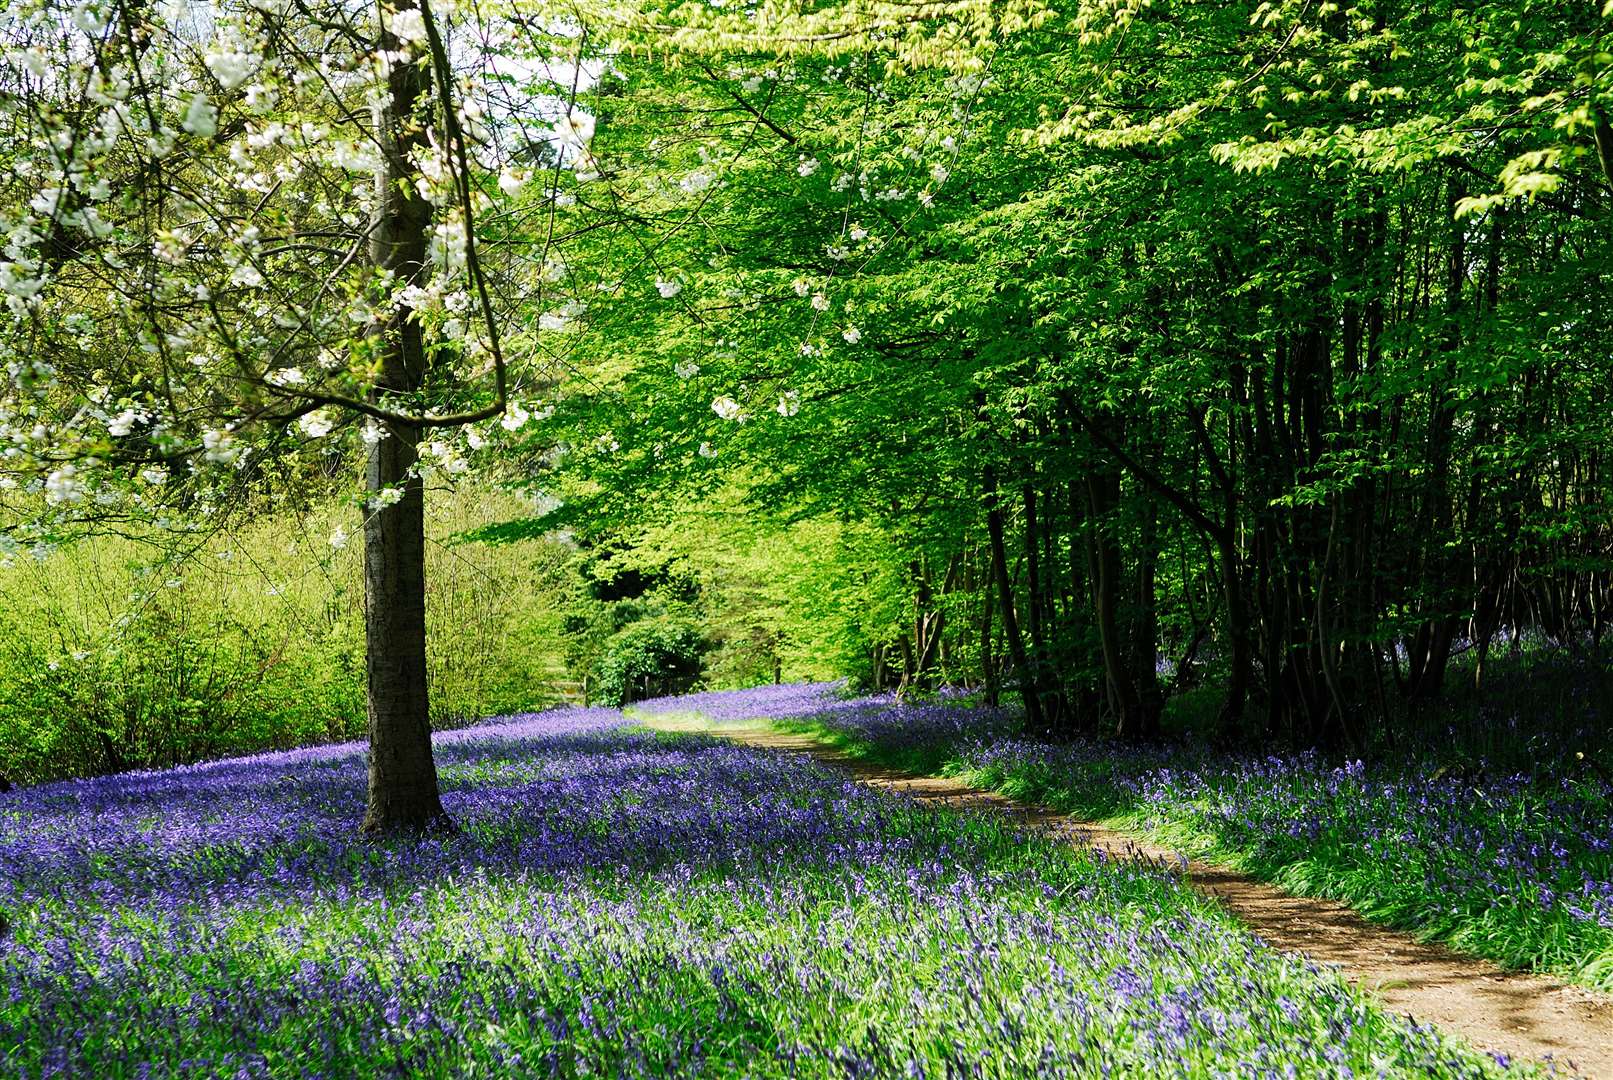 Take a leisurely walk through the bluebells this spring. Picture: Supplied by Hole Park